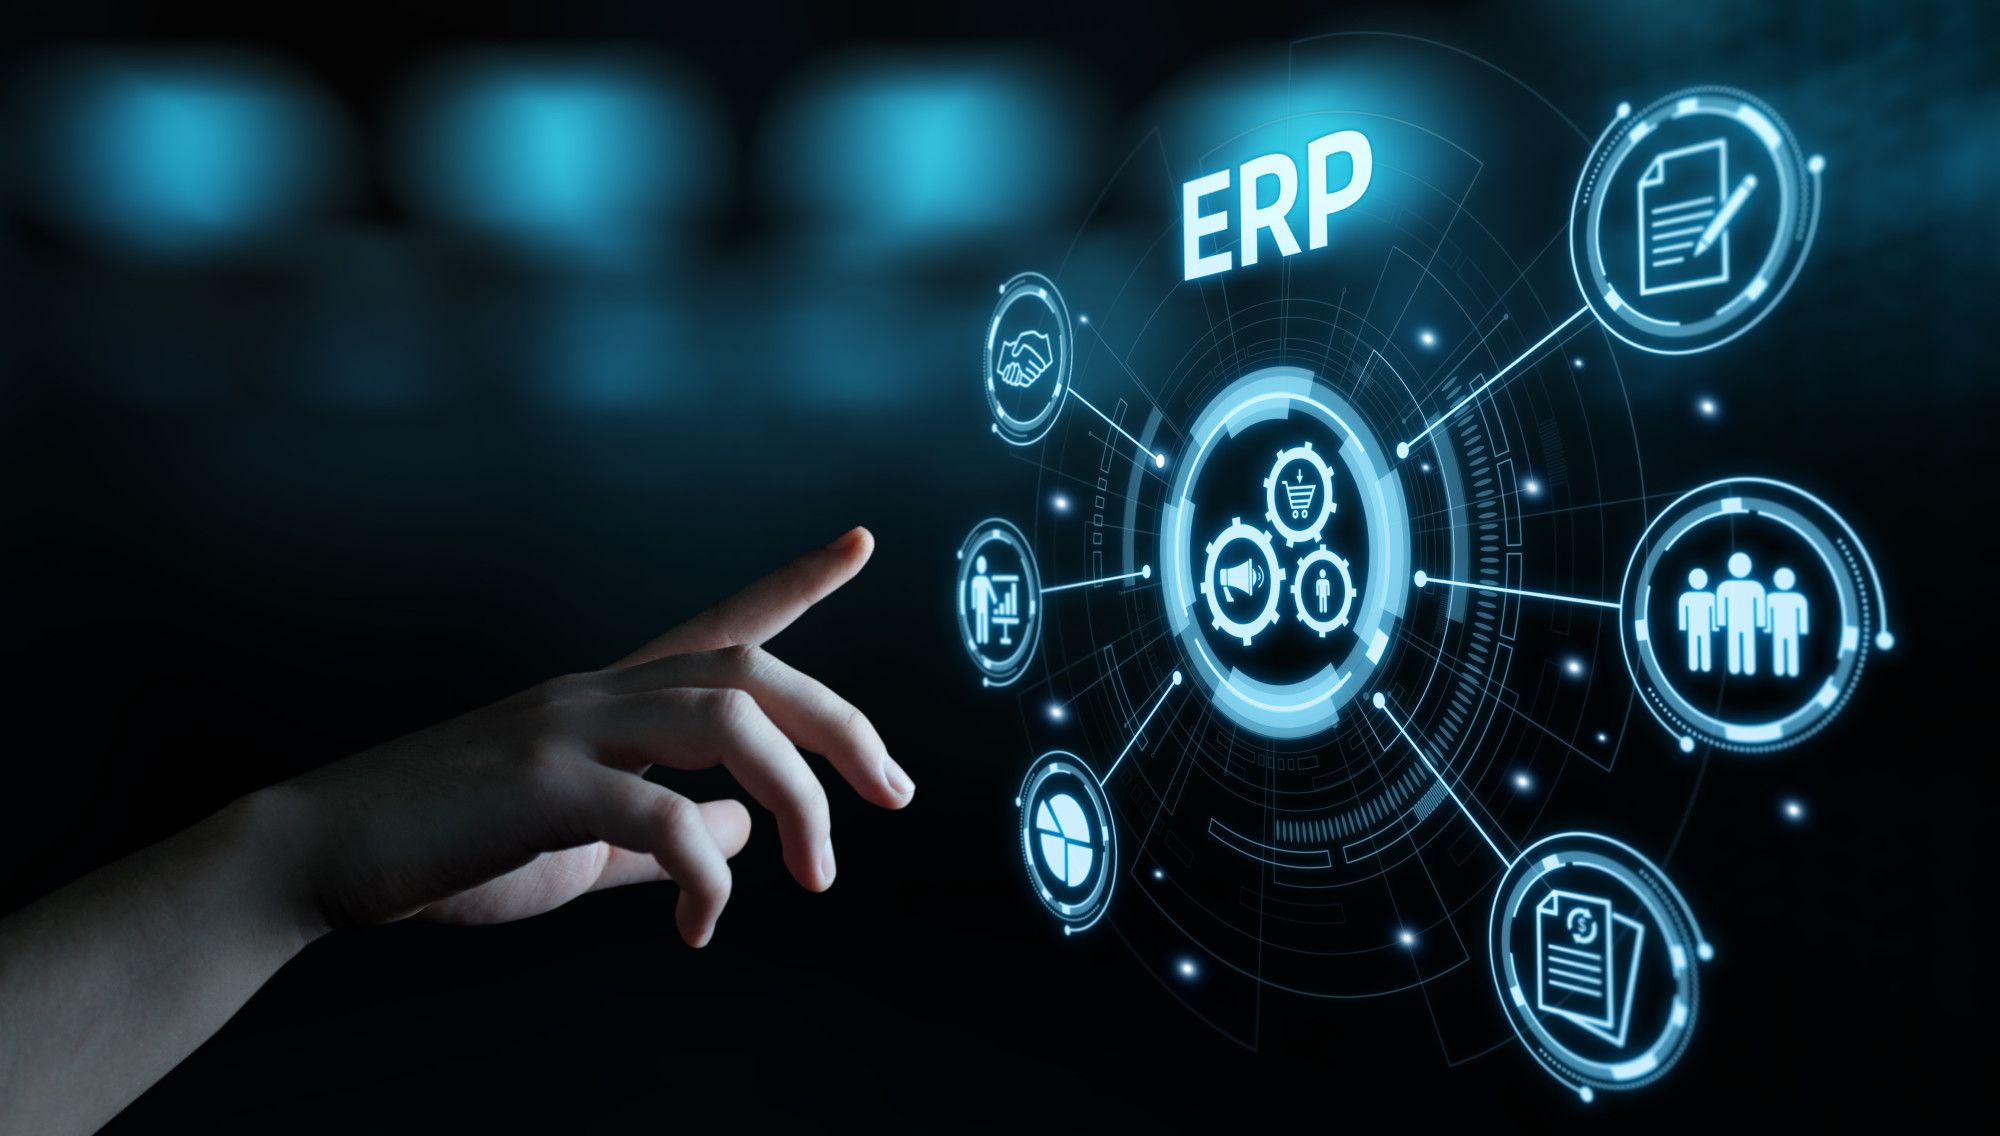 3 Tips for Choosing the Best ERP Software for Your Business